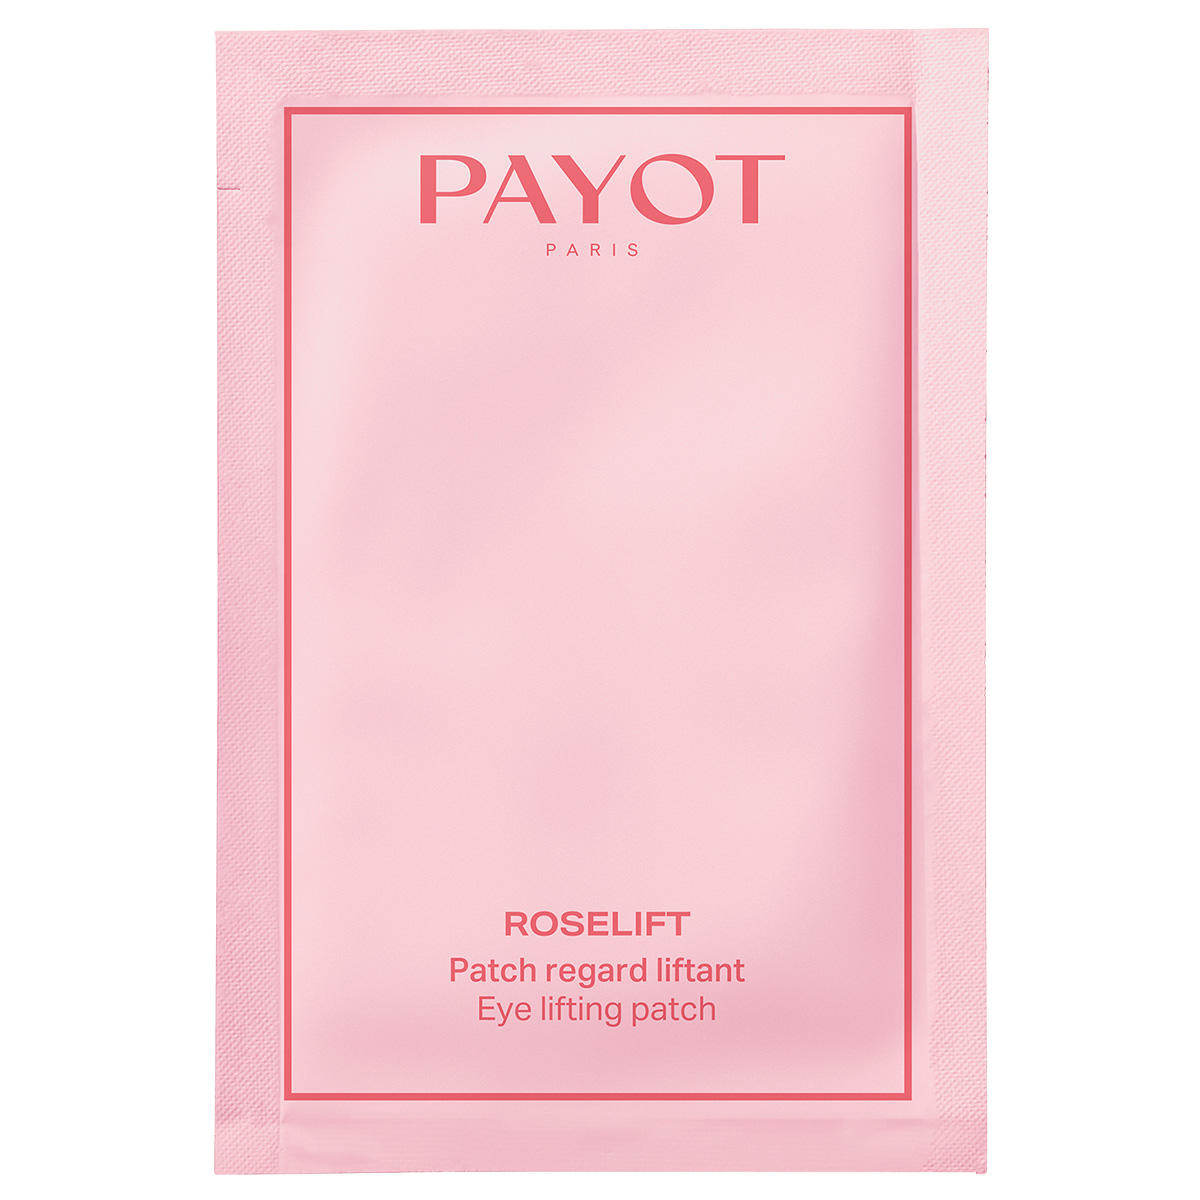 Payot Roselift Eye Lifting Patch  - 2